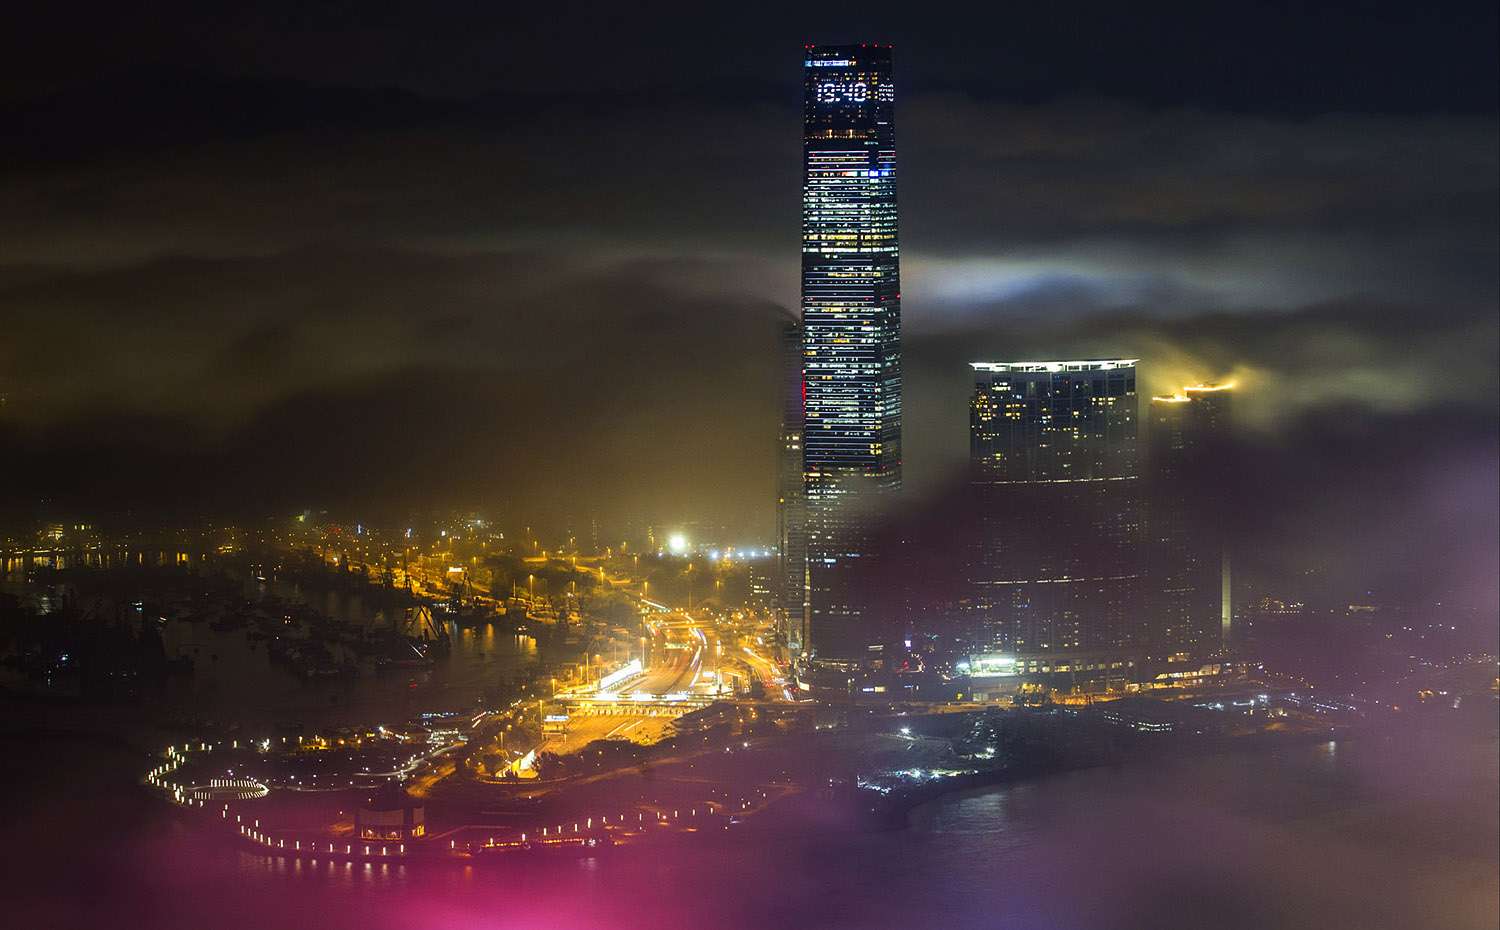 Kowloon’s ICC tower peeks through the fog that hides the rest of the northern part of the city. Photo: Bruce Yan